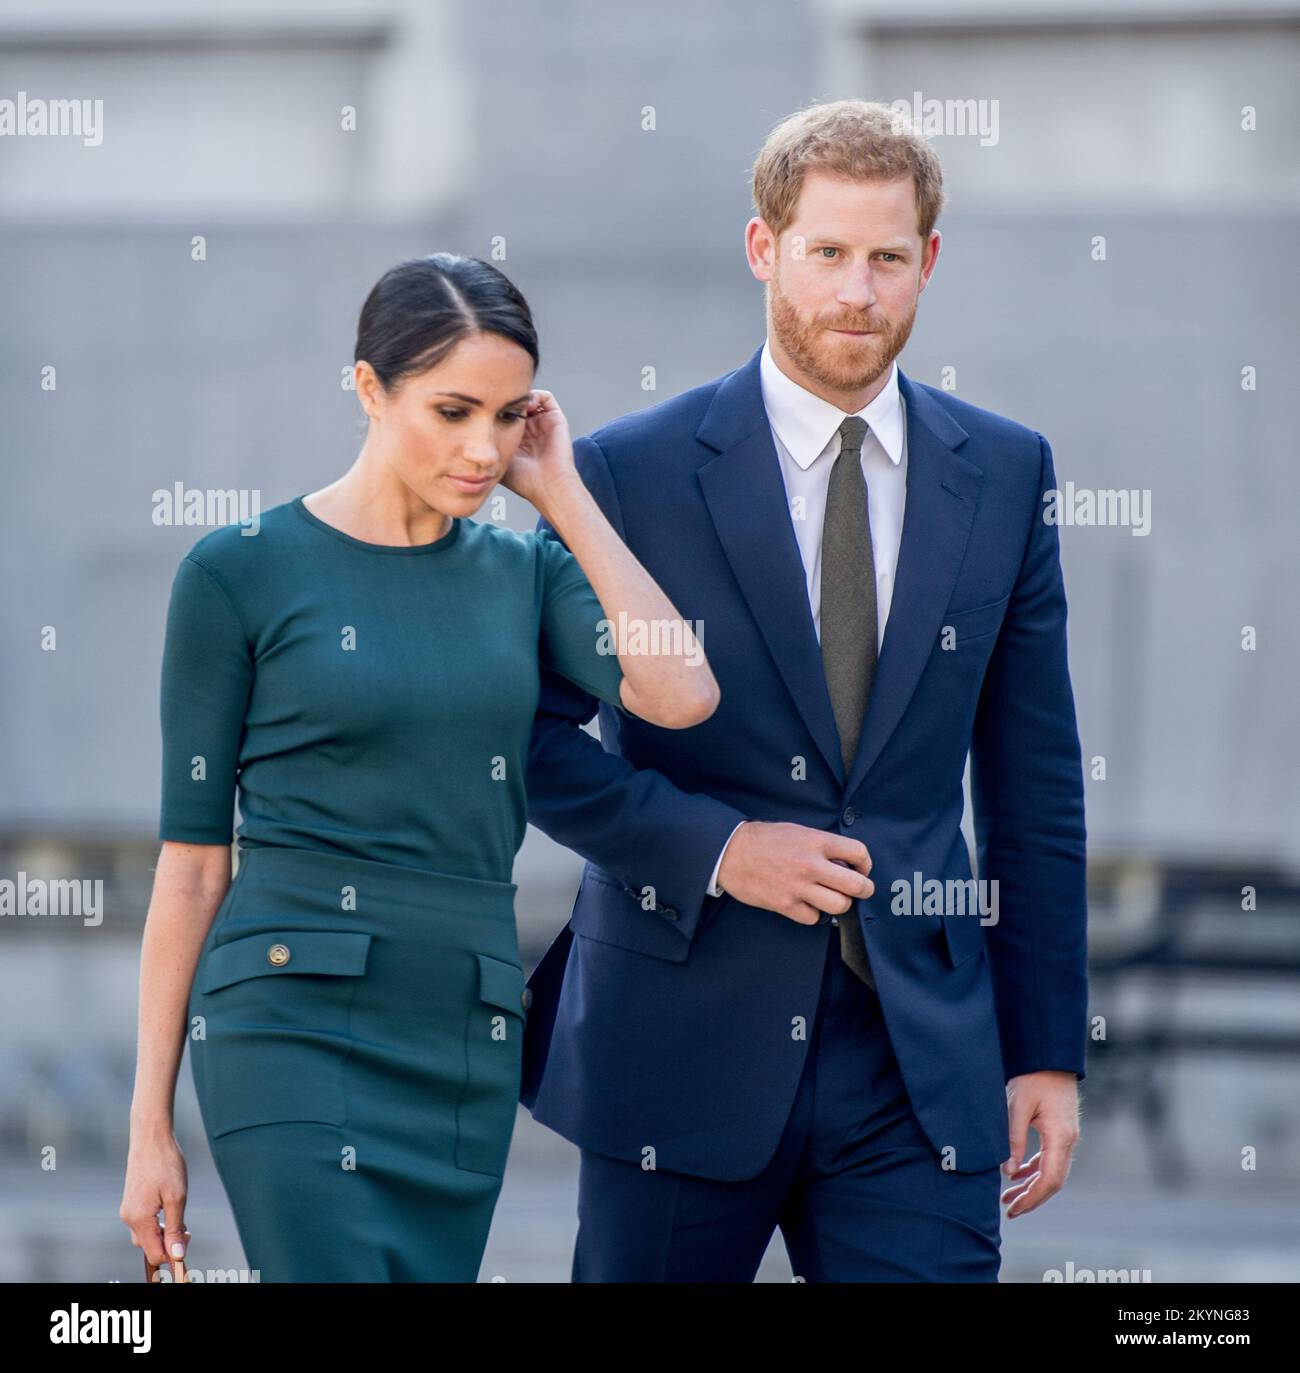 Prince Harry and Meghan drop bombshell Netflix trailer with hint of fresh  attacks on royal family and with duchess seen sobbing. The Duke of Sussex  living in the United States with his